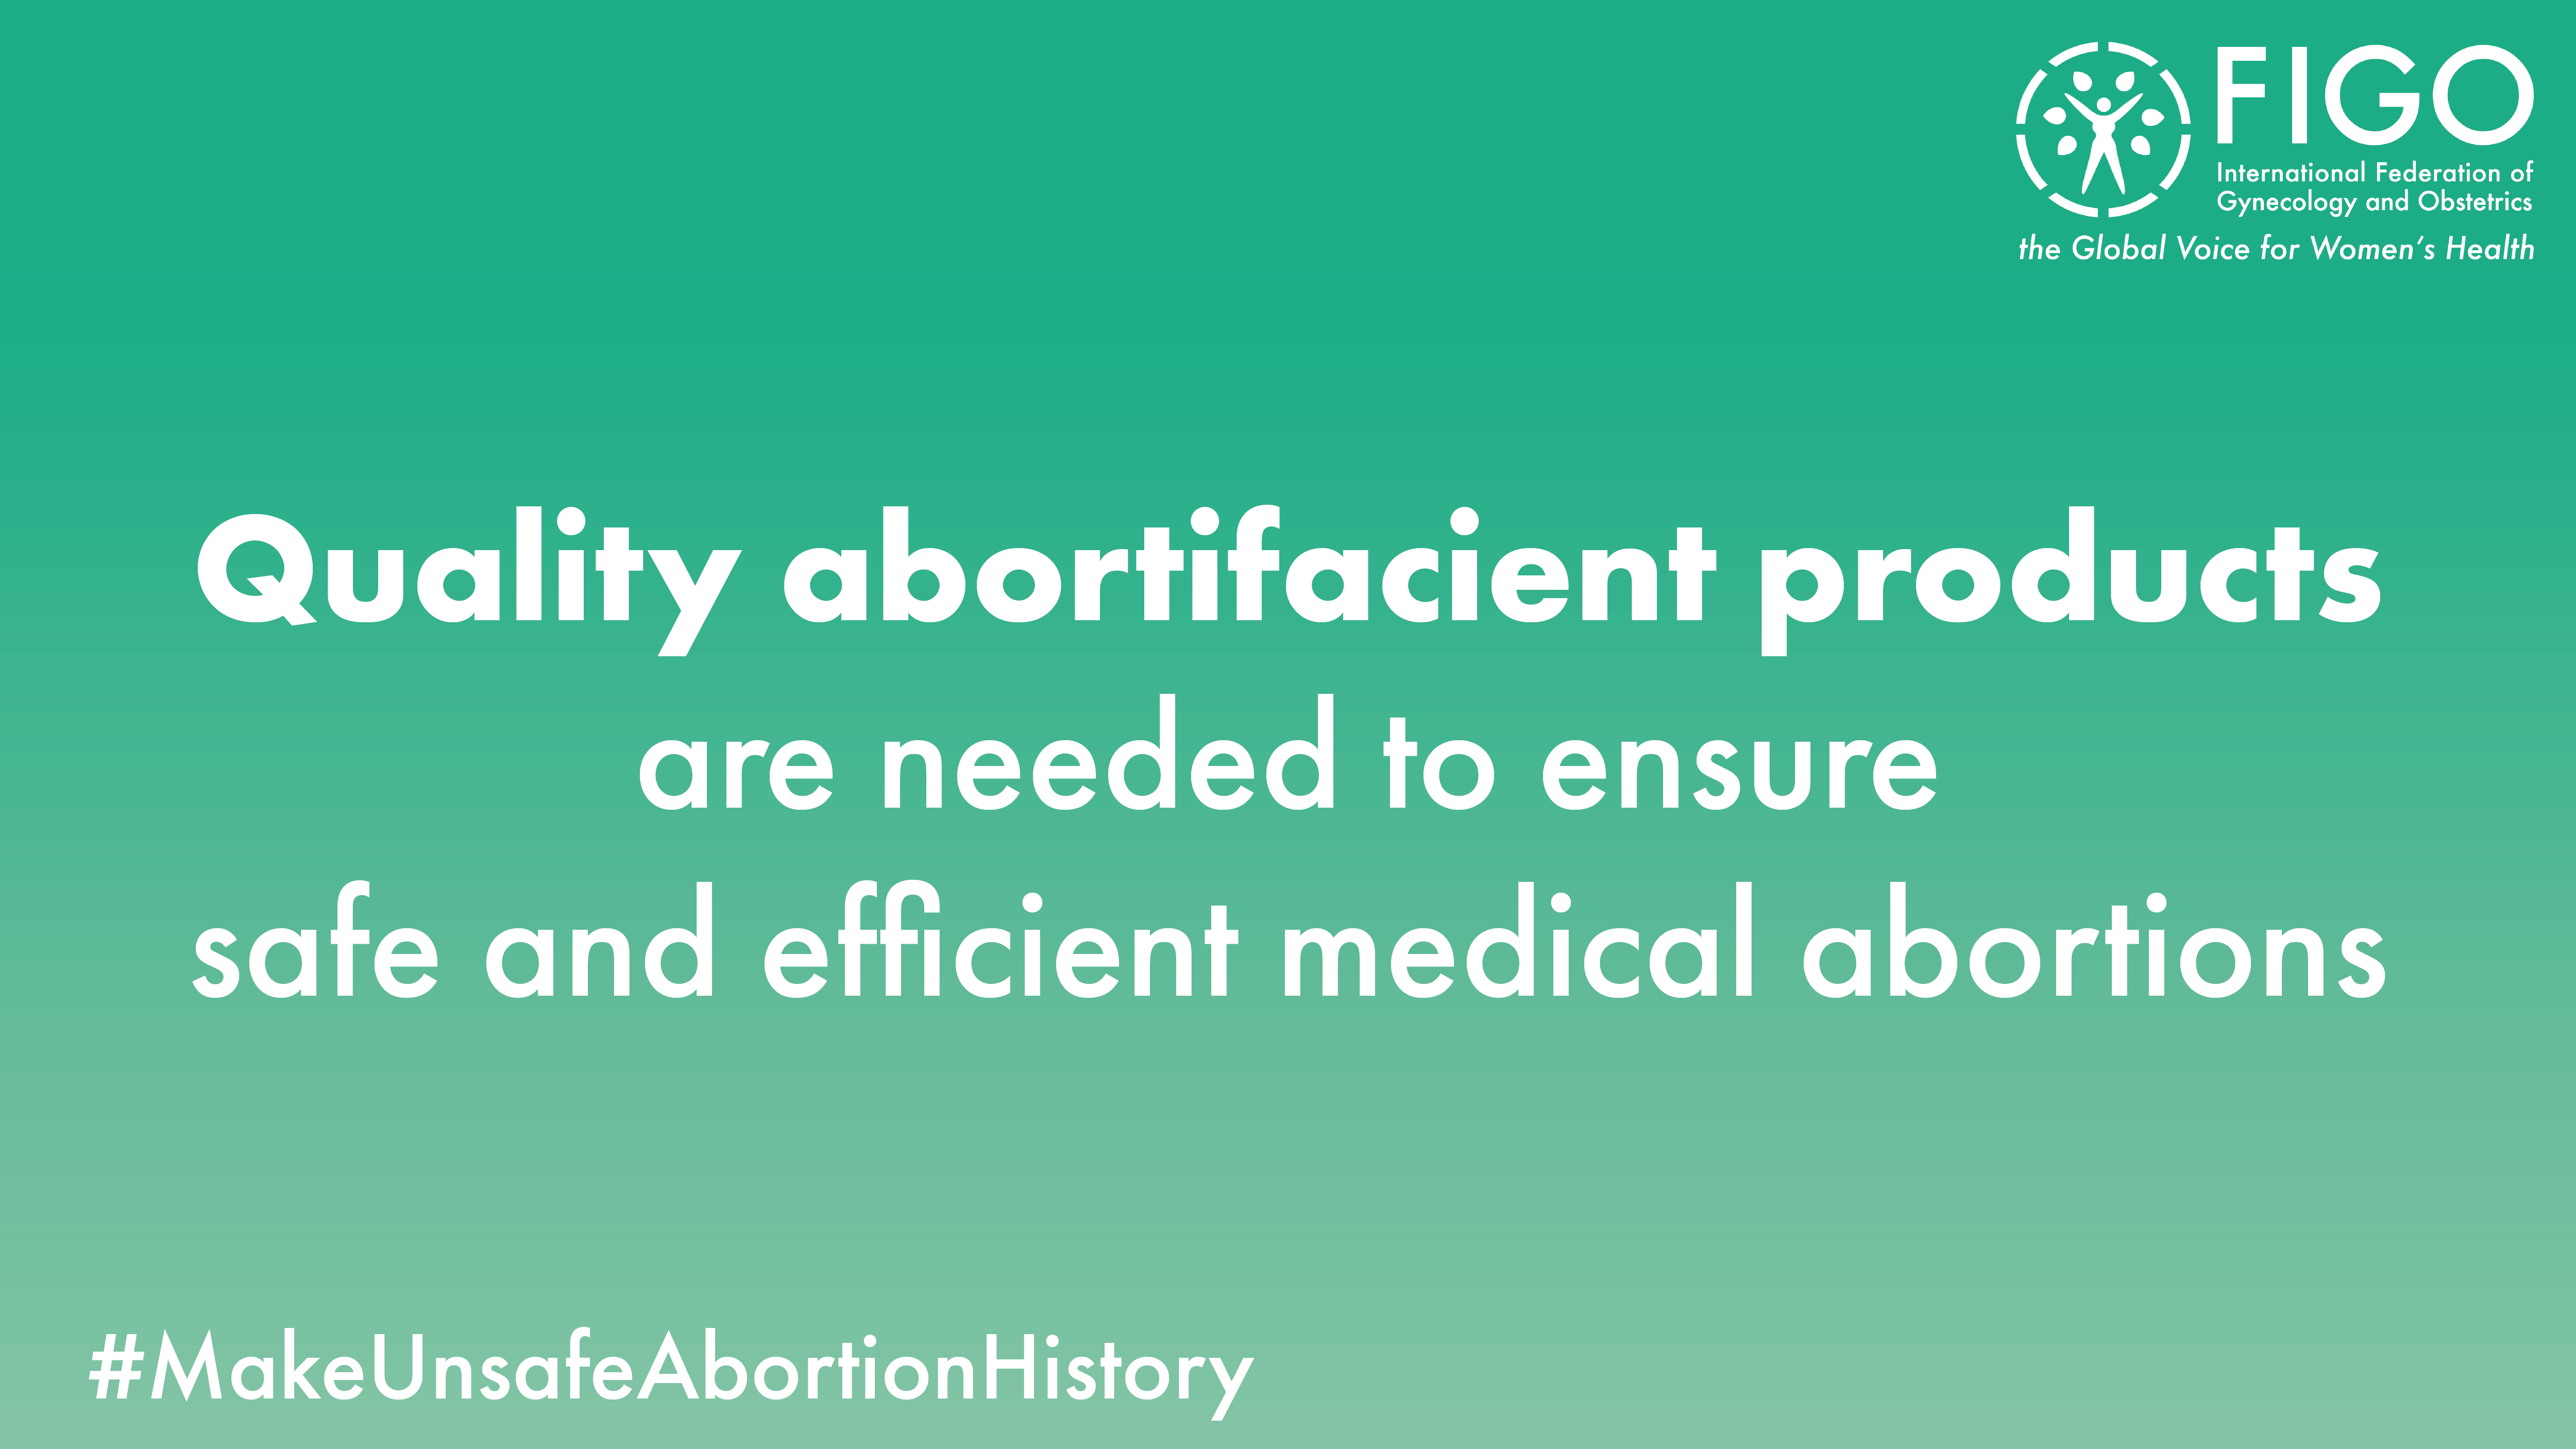 abortifacient products and safe medical abortion visual